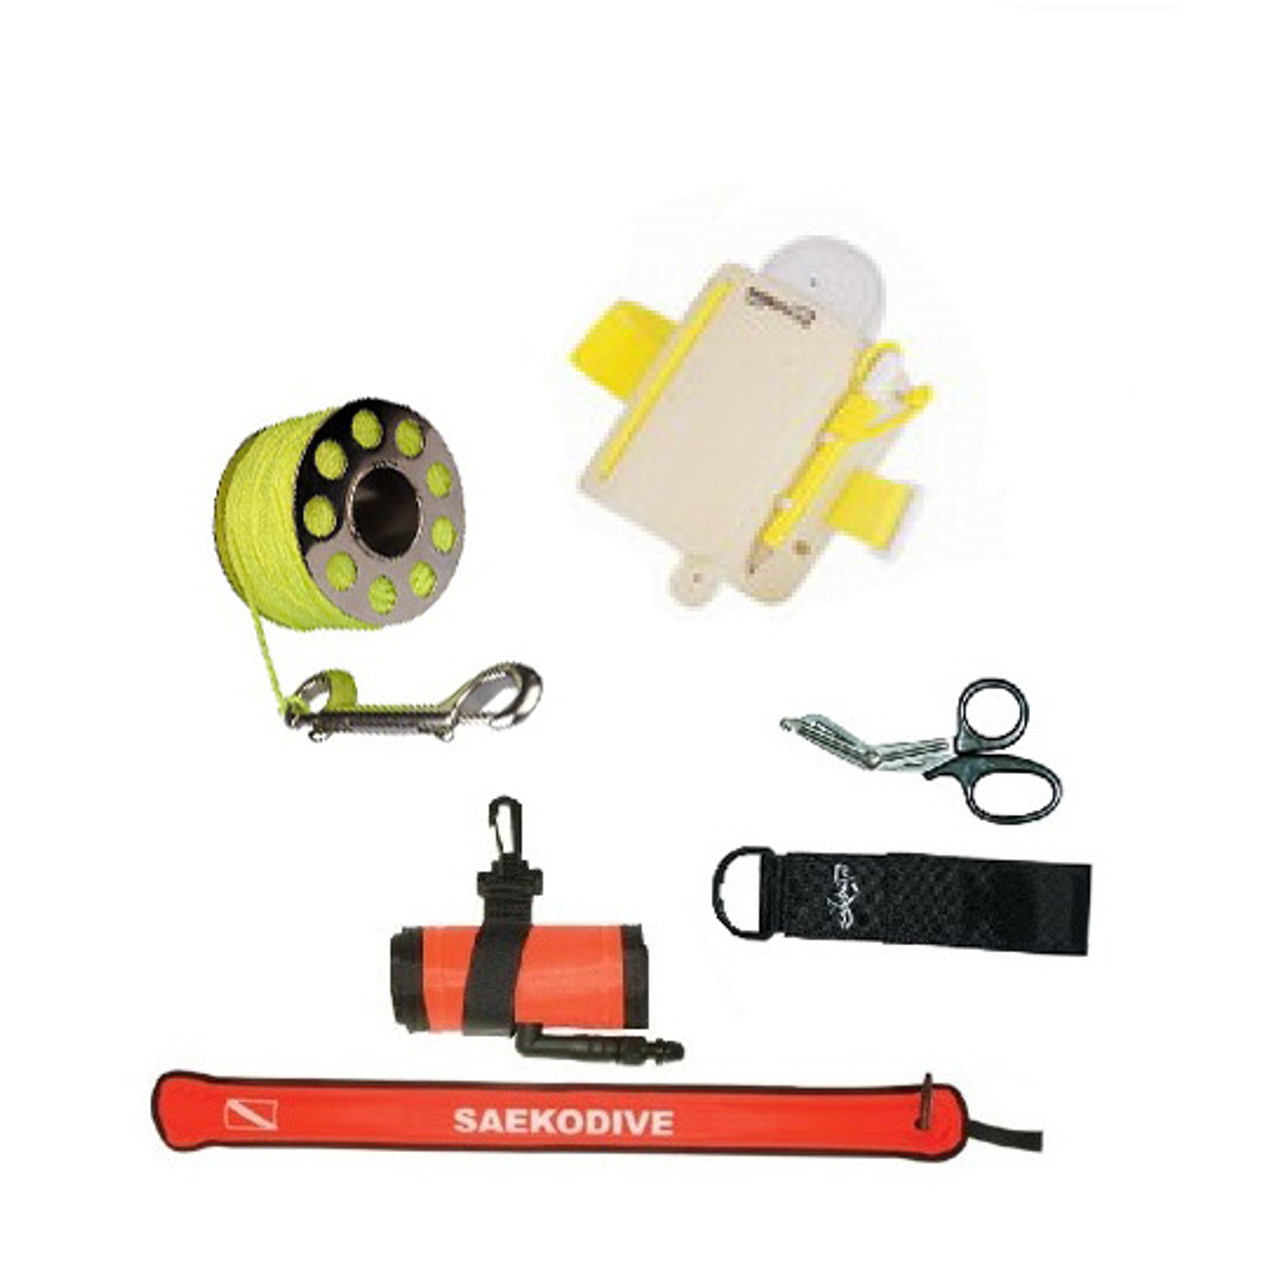 Jual Scuba Diving High Visibility Surface Marker Buoy + Dive Reel